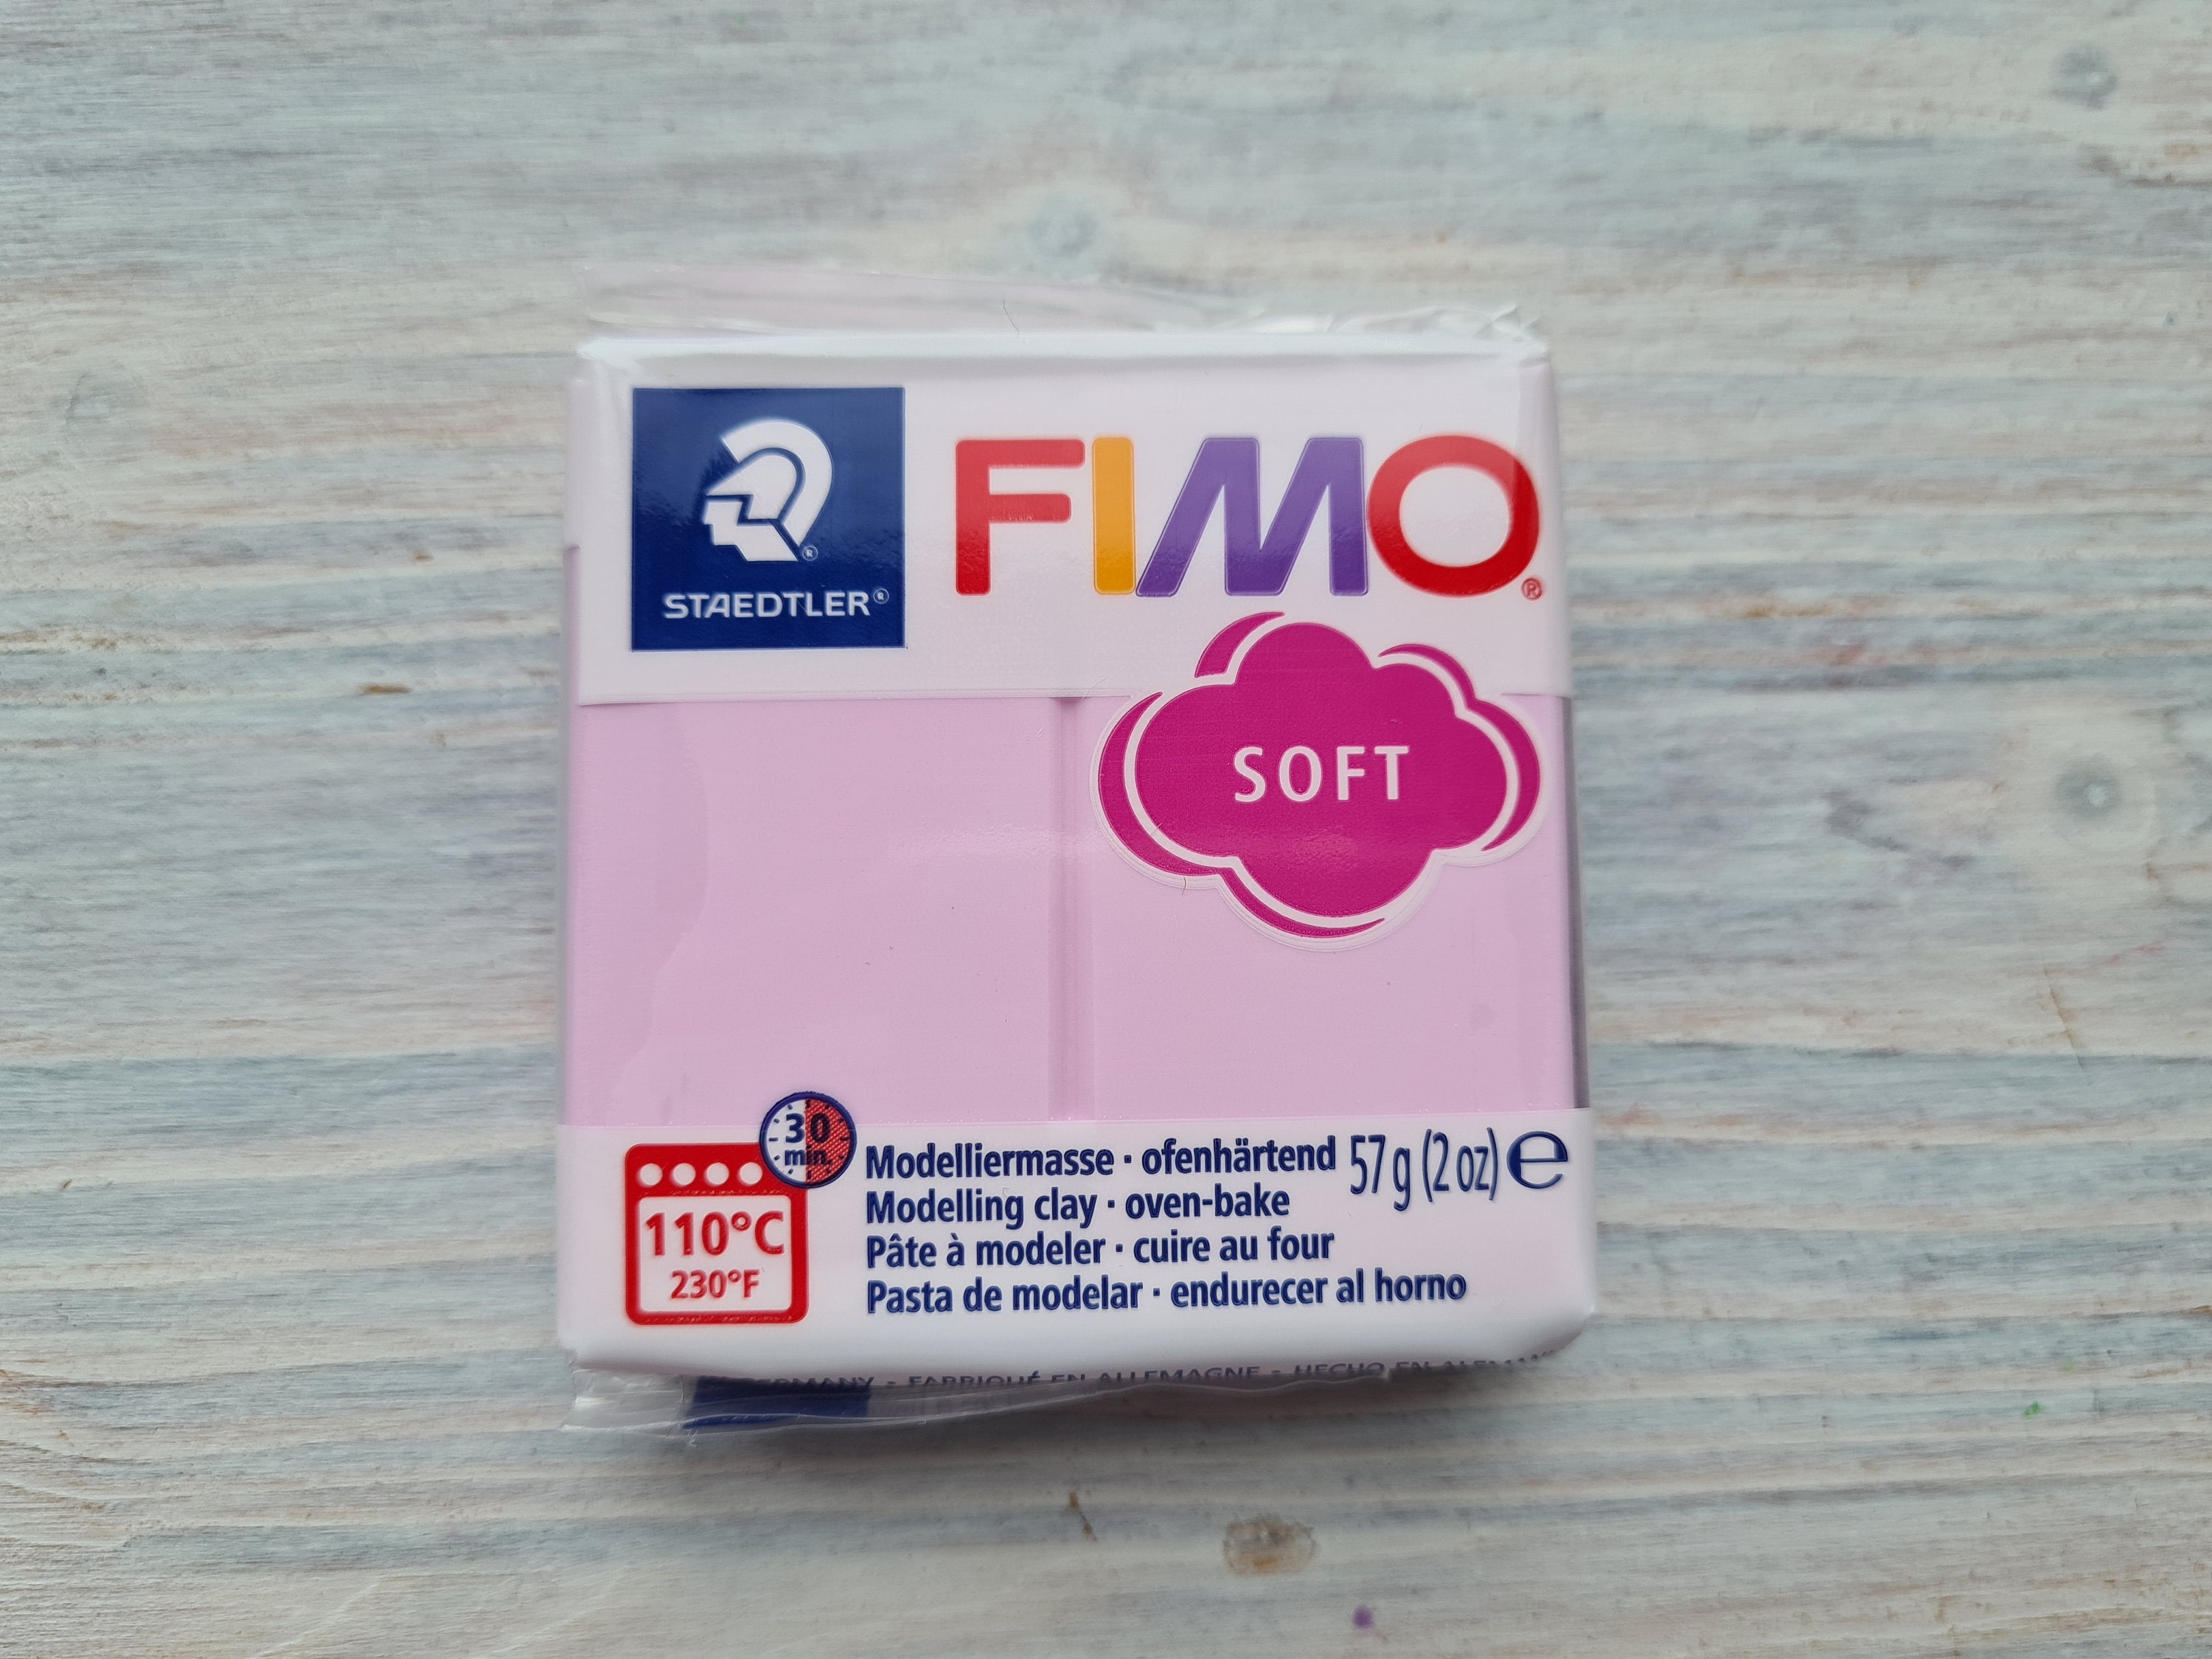 SG Education FIMO 8020 0 Fimo Soft Modelling Clay, 57 g, White